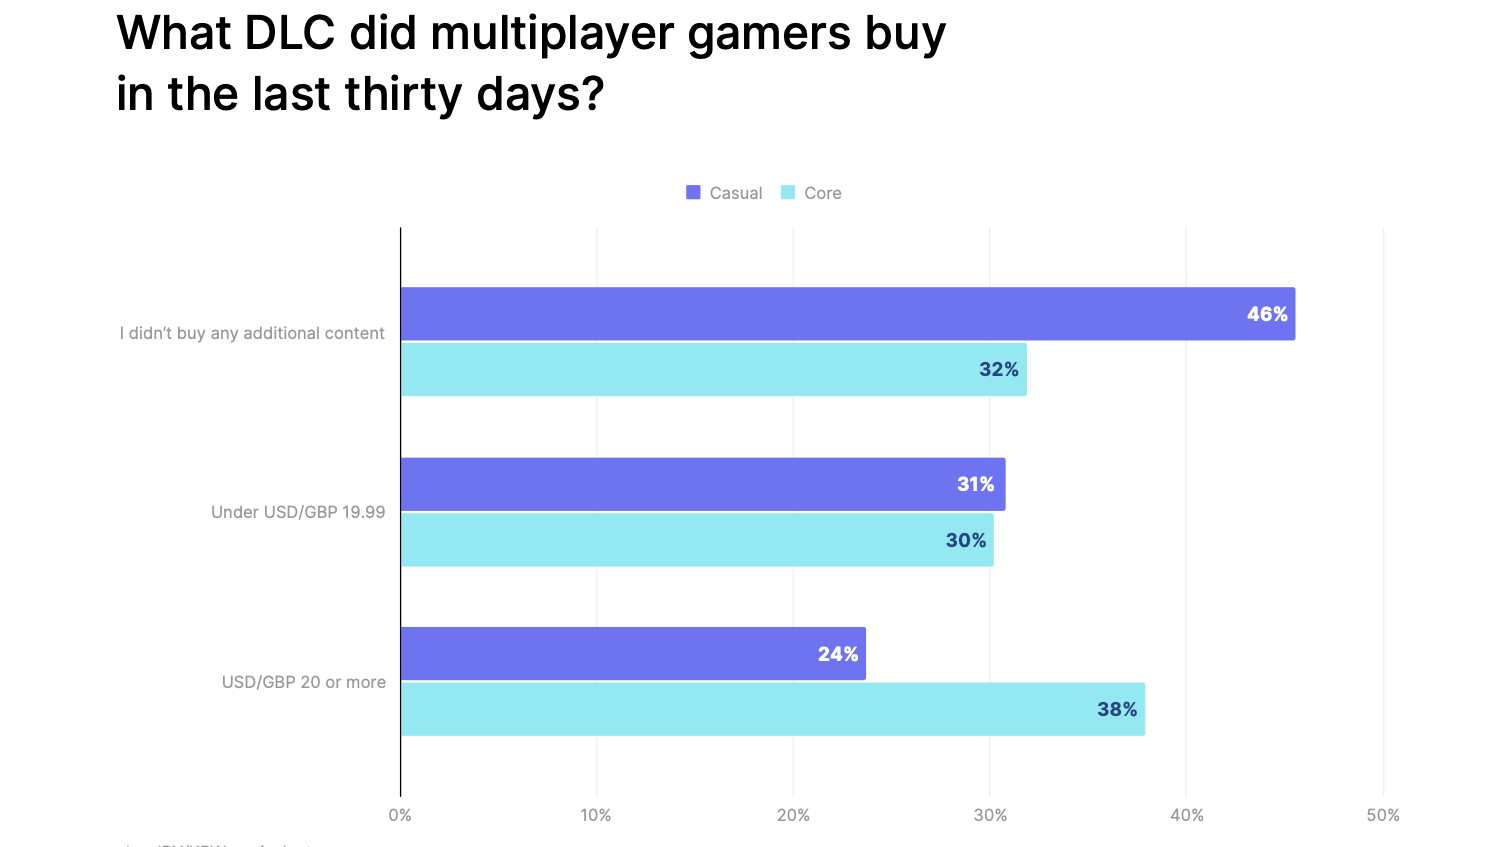 Bar chart depicting differences in the buying habits (DLC) of multiplayer gamers over a 30-day period between core and casual gamers.